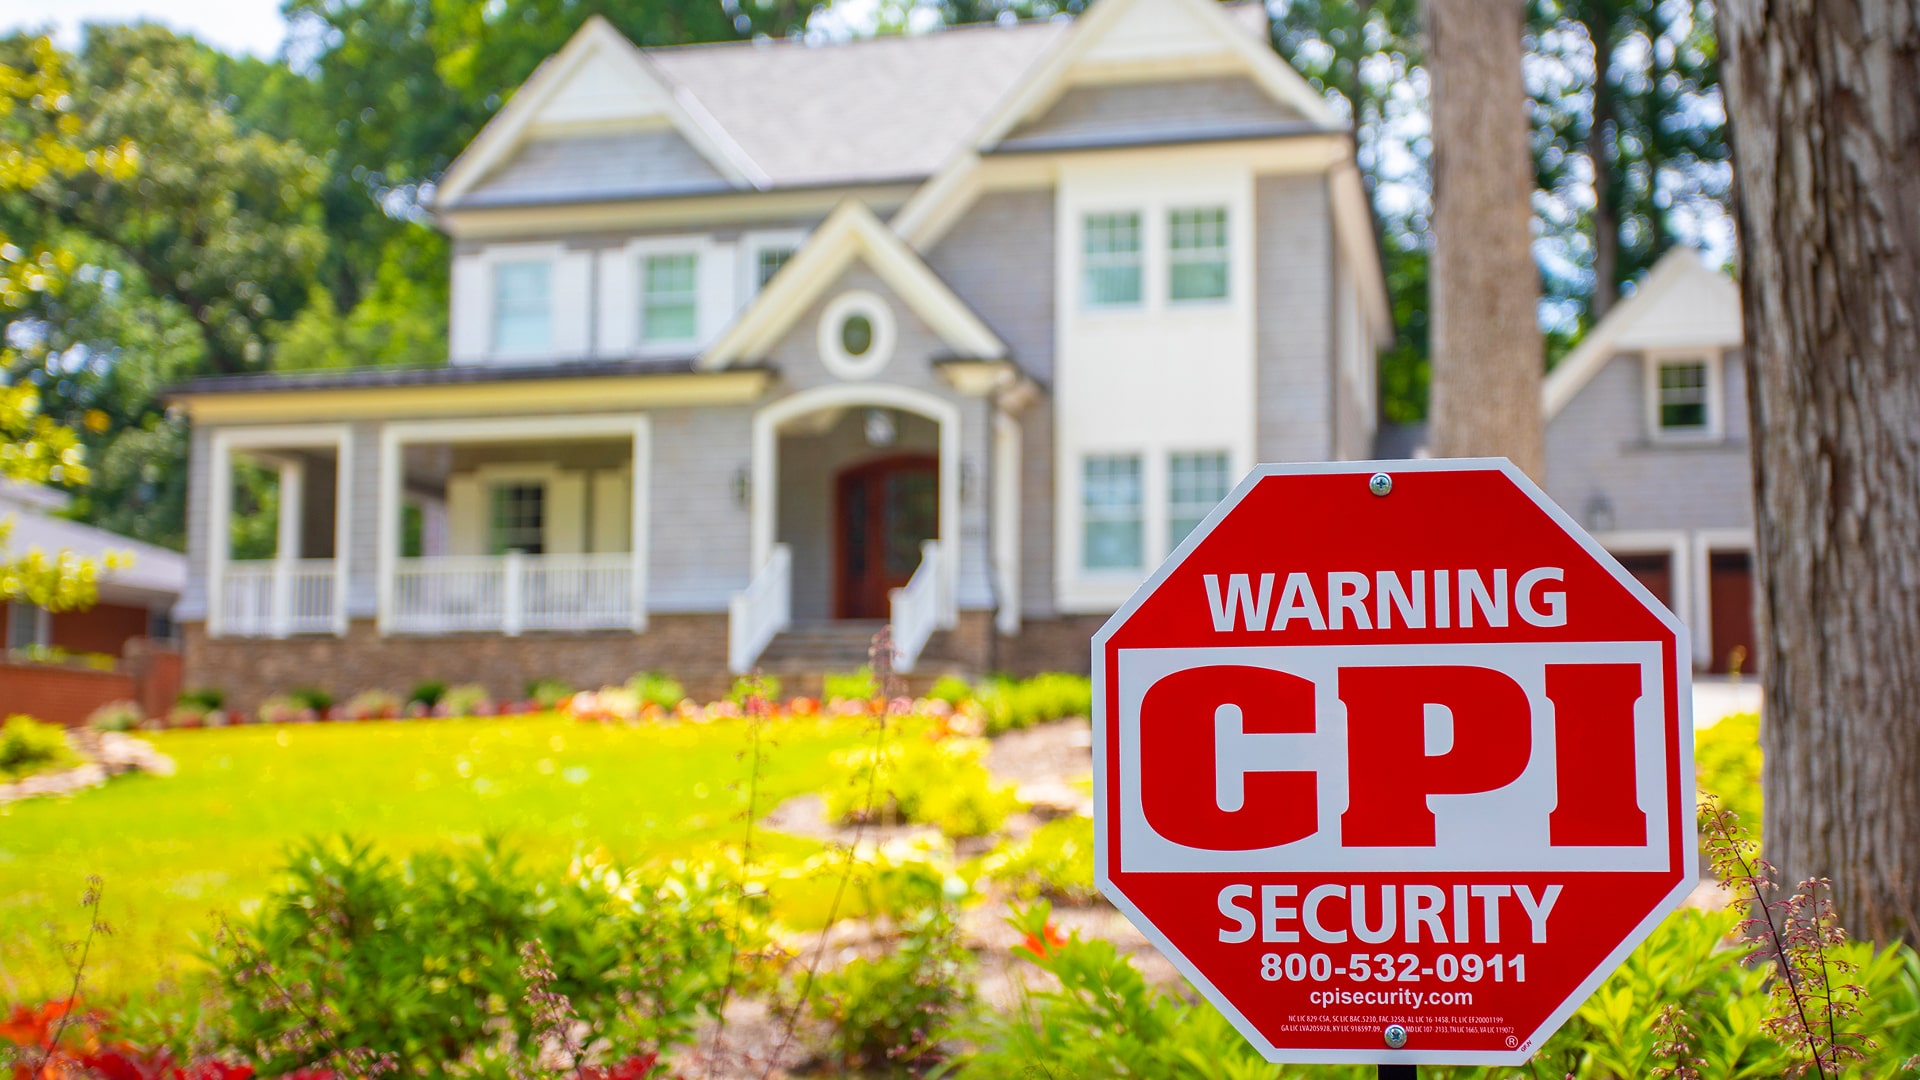 Vacation Home Security Tips